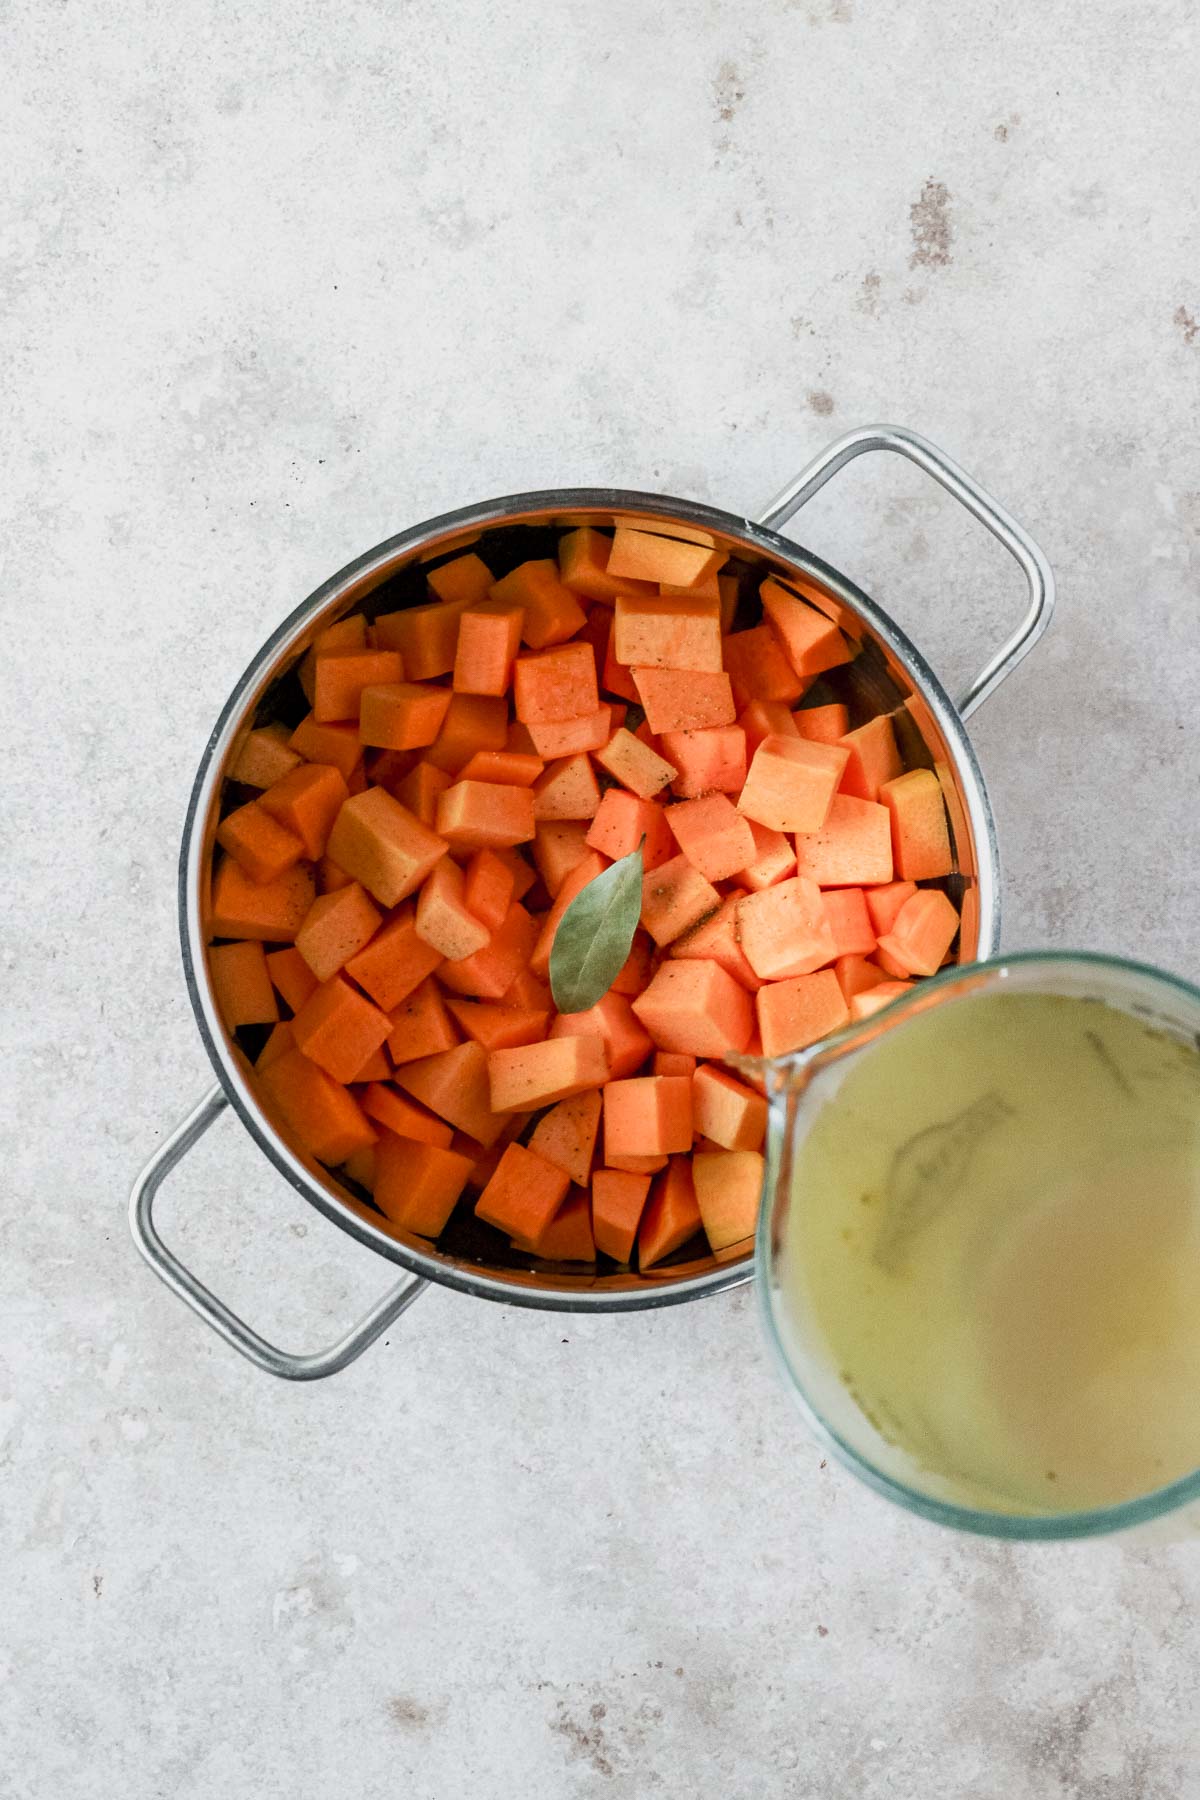 pouring vegetable stock into roasted pumpkin and spices in pot.